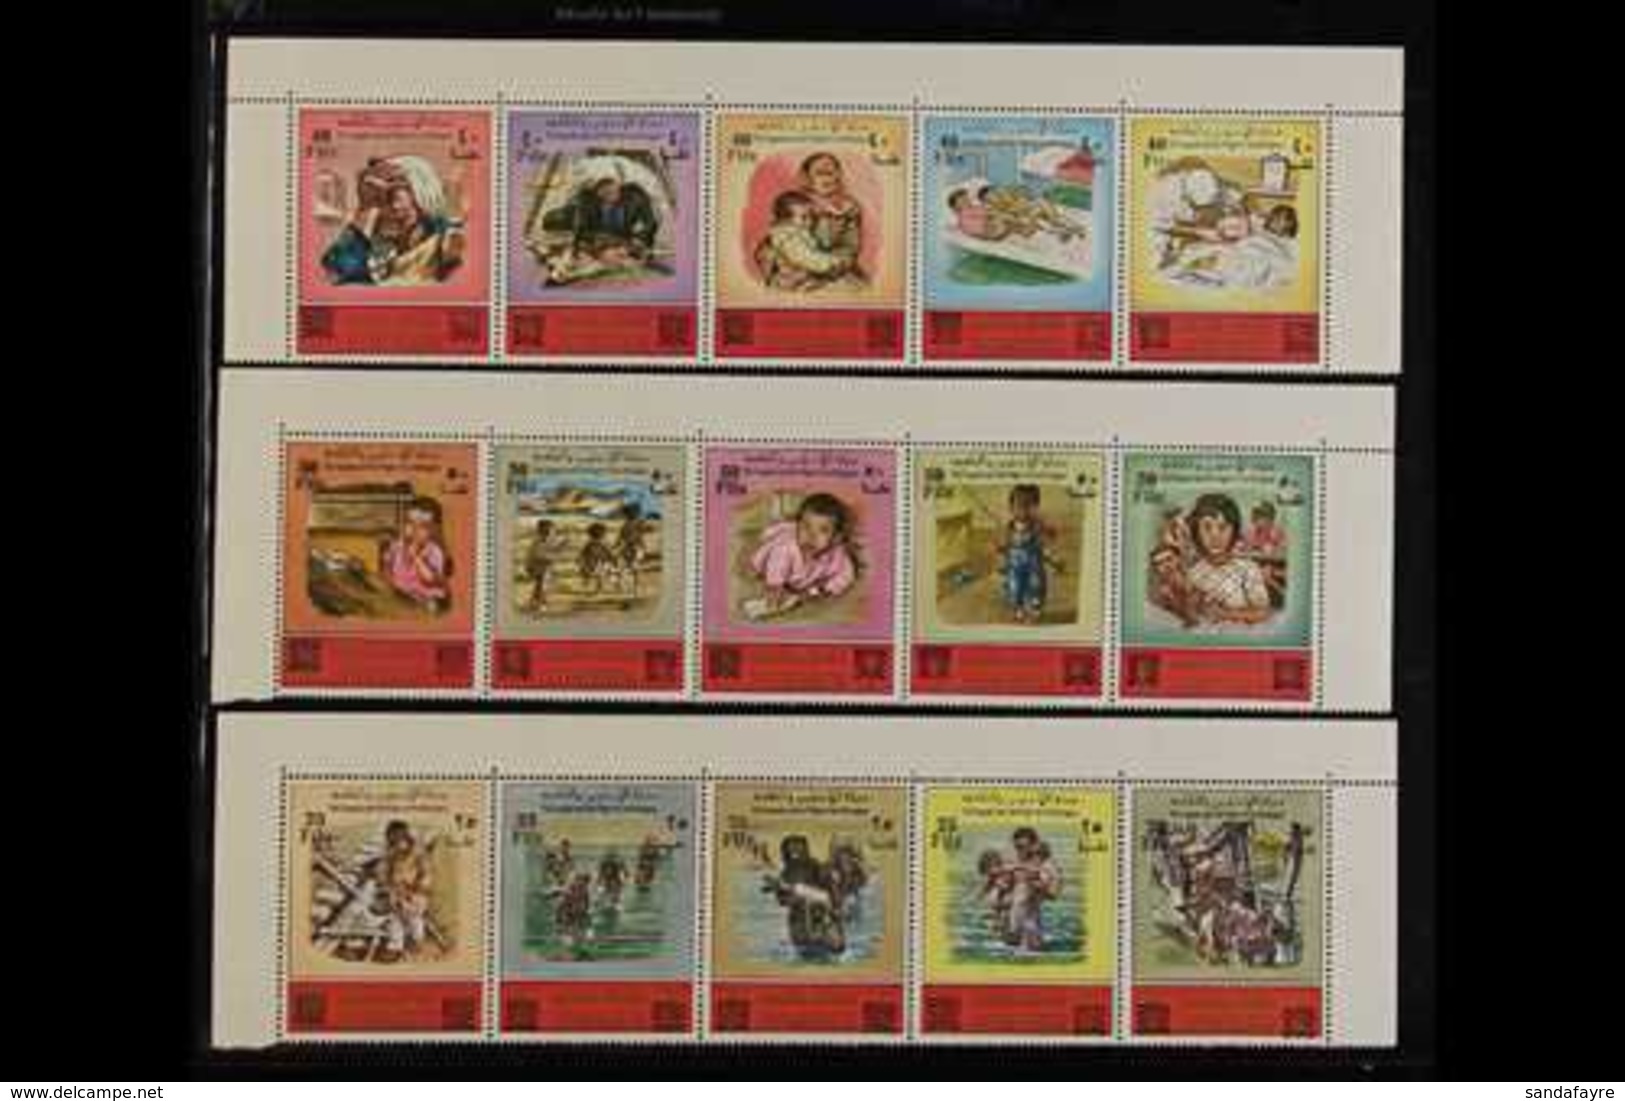 1976 Surcharges On 'Tragedy Of The Refugees' And 'Tragedy In The Holy Lands' Complete Sets, SG 1137/66 & 1167/96, Superb - Jordanien